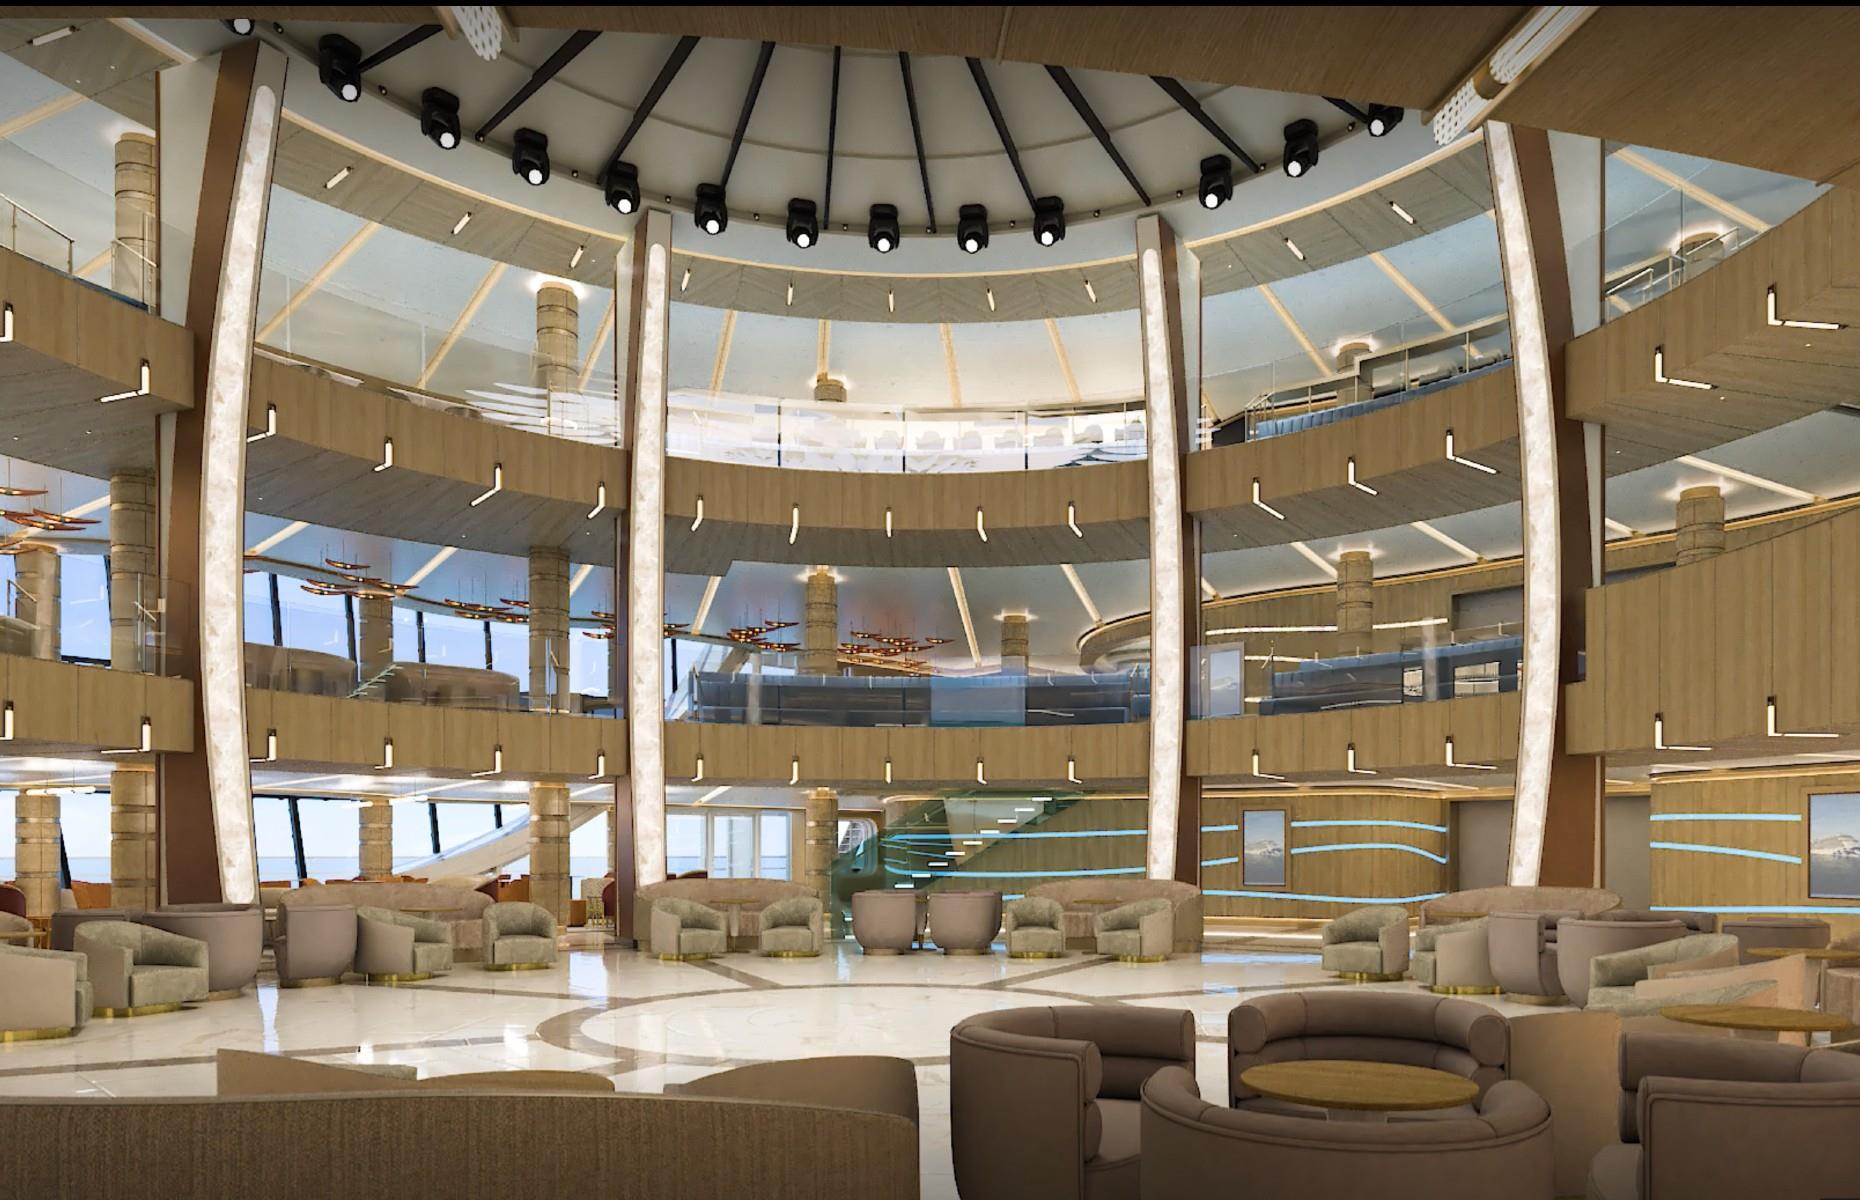 Sun Princess will have a staggering 29 restaurants, lounges and bars. We’re predicting the most popular spot will be the three-story Piazza, with its enormous LED screen and various restaurants and bars – including the Coffee Currents café, a new concept for Princess. There’s also the Dome, a glass dome with an indoor-outdoor pool which transforms into a stage at nighttime and will be the setting for adrenaline-fueled acrobatic performances.